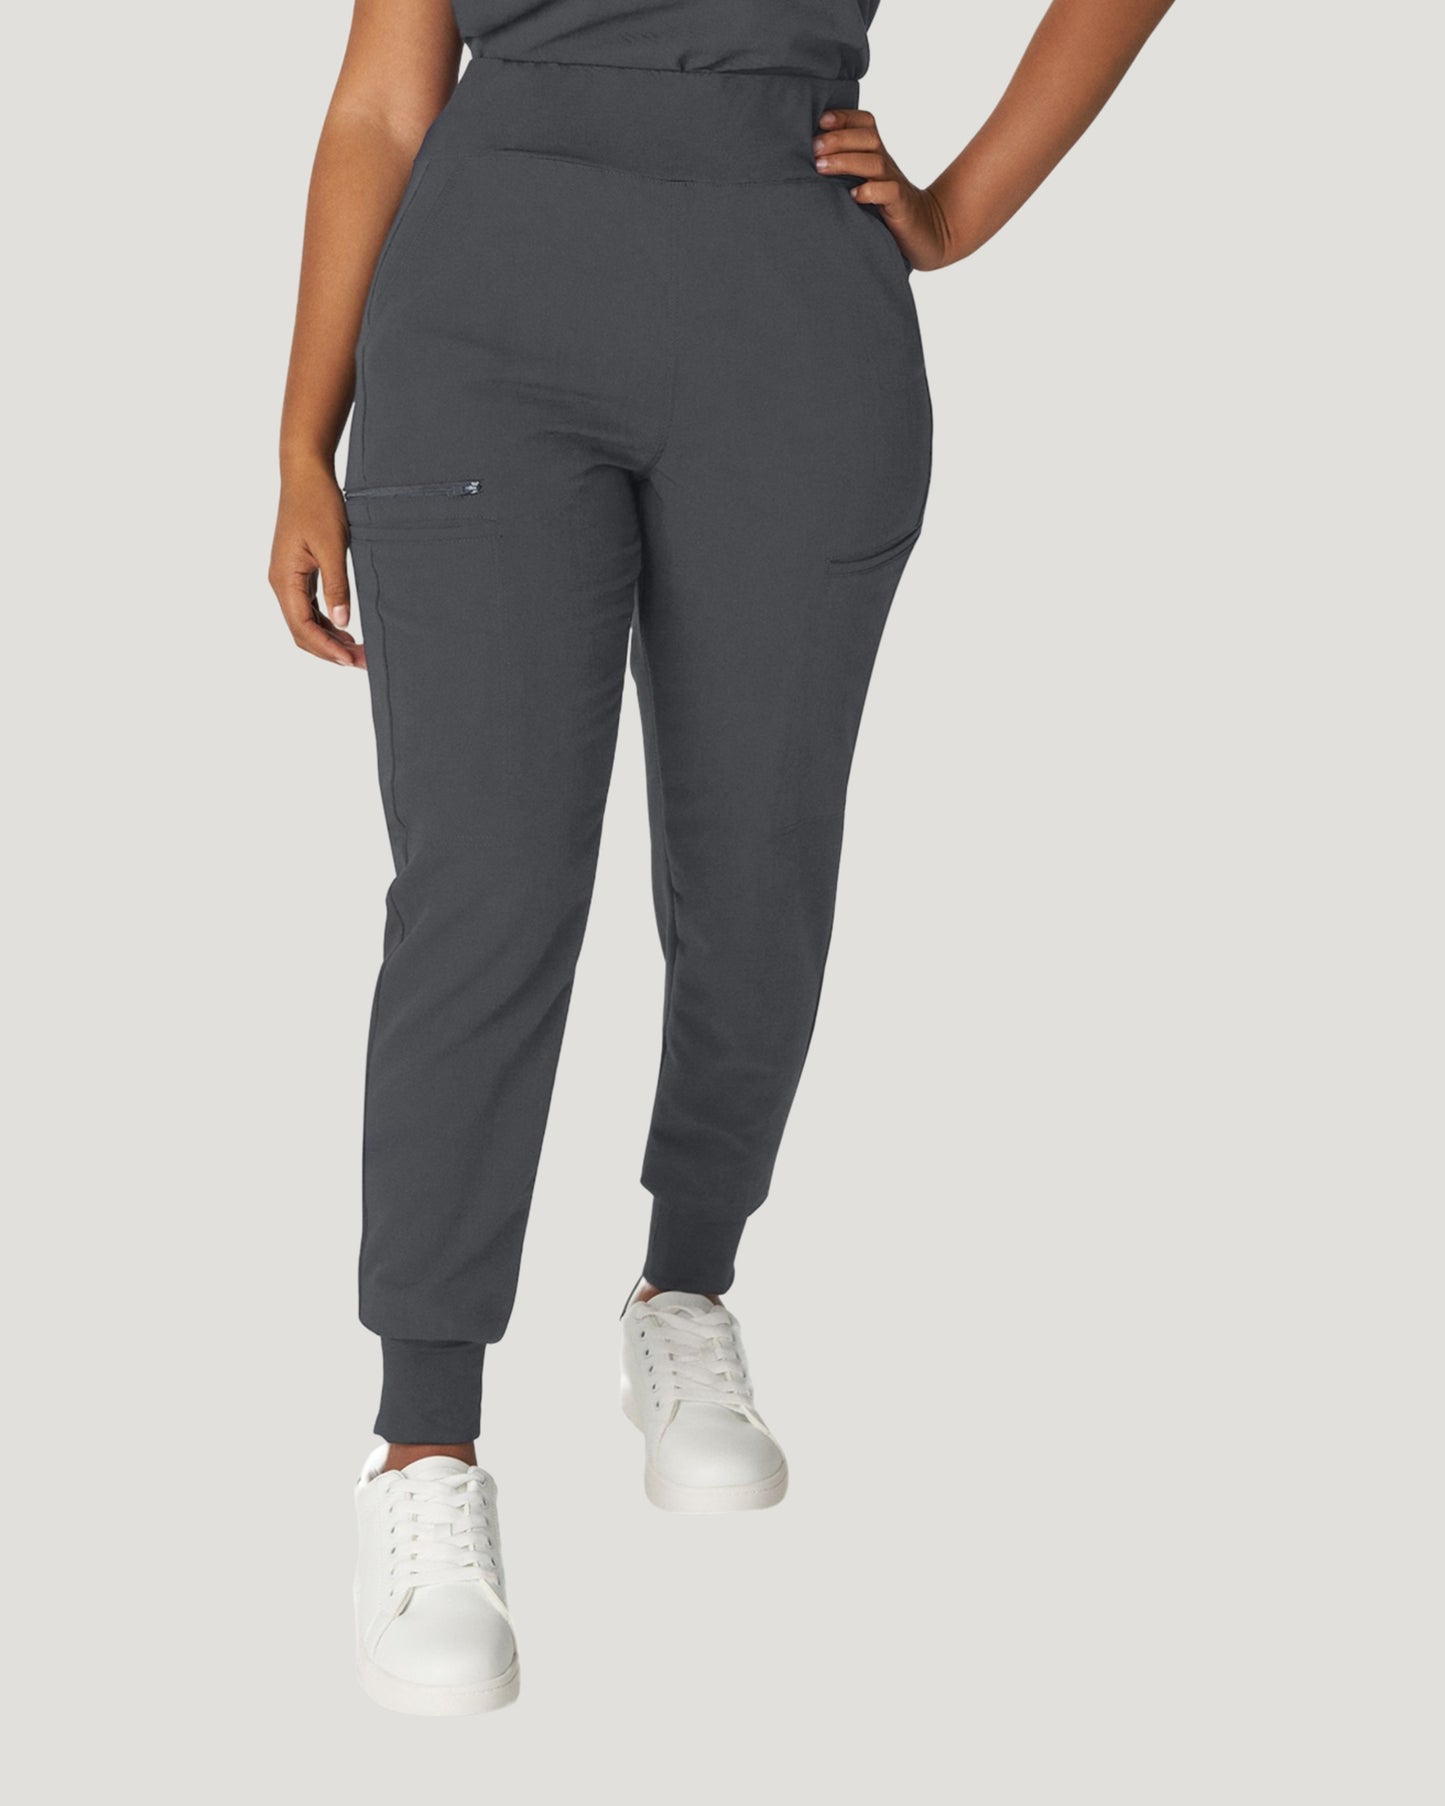 White Cross Vtess WB410P Petite Joggers with Jersey Knit Contrast